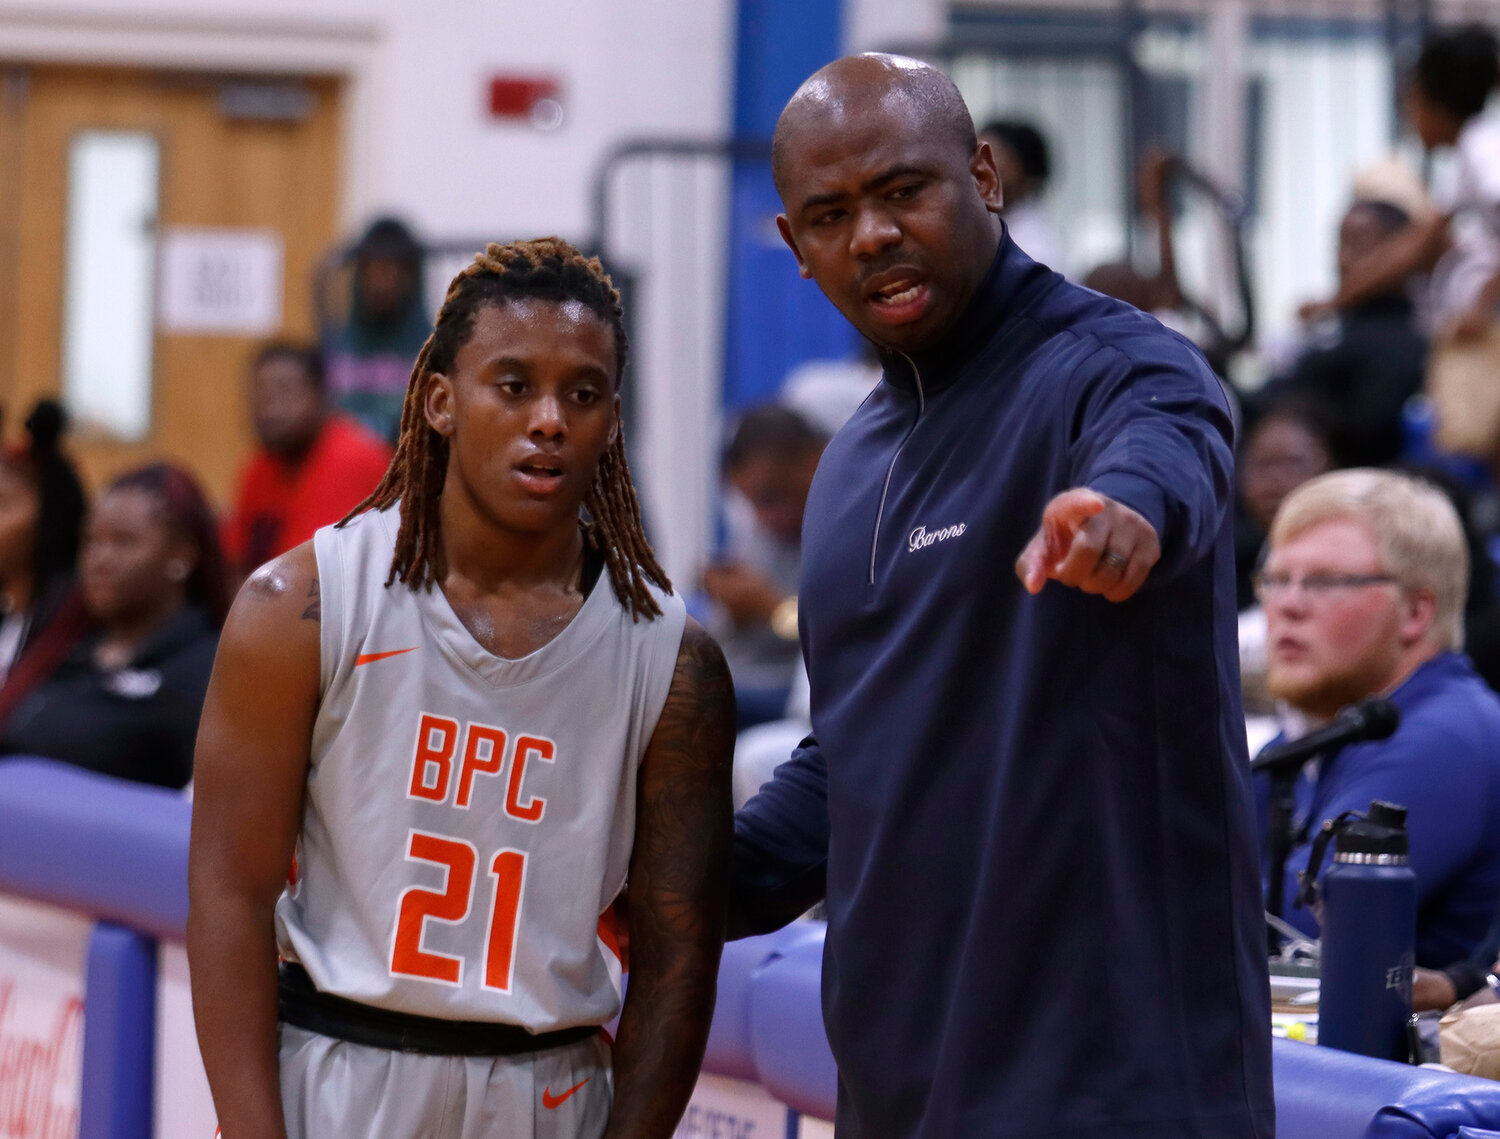 Brewton-Parker College women's basketball coach Steve Edwards gives instructions to Aaliyah Clay. (Photo/Brewton Parker College)